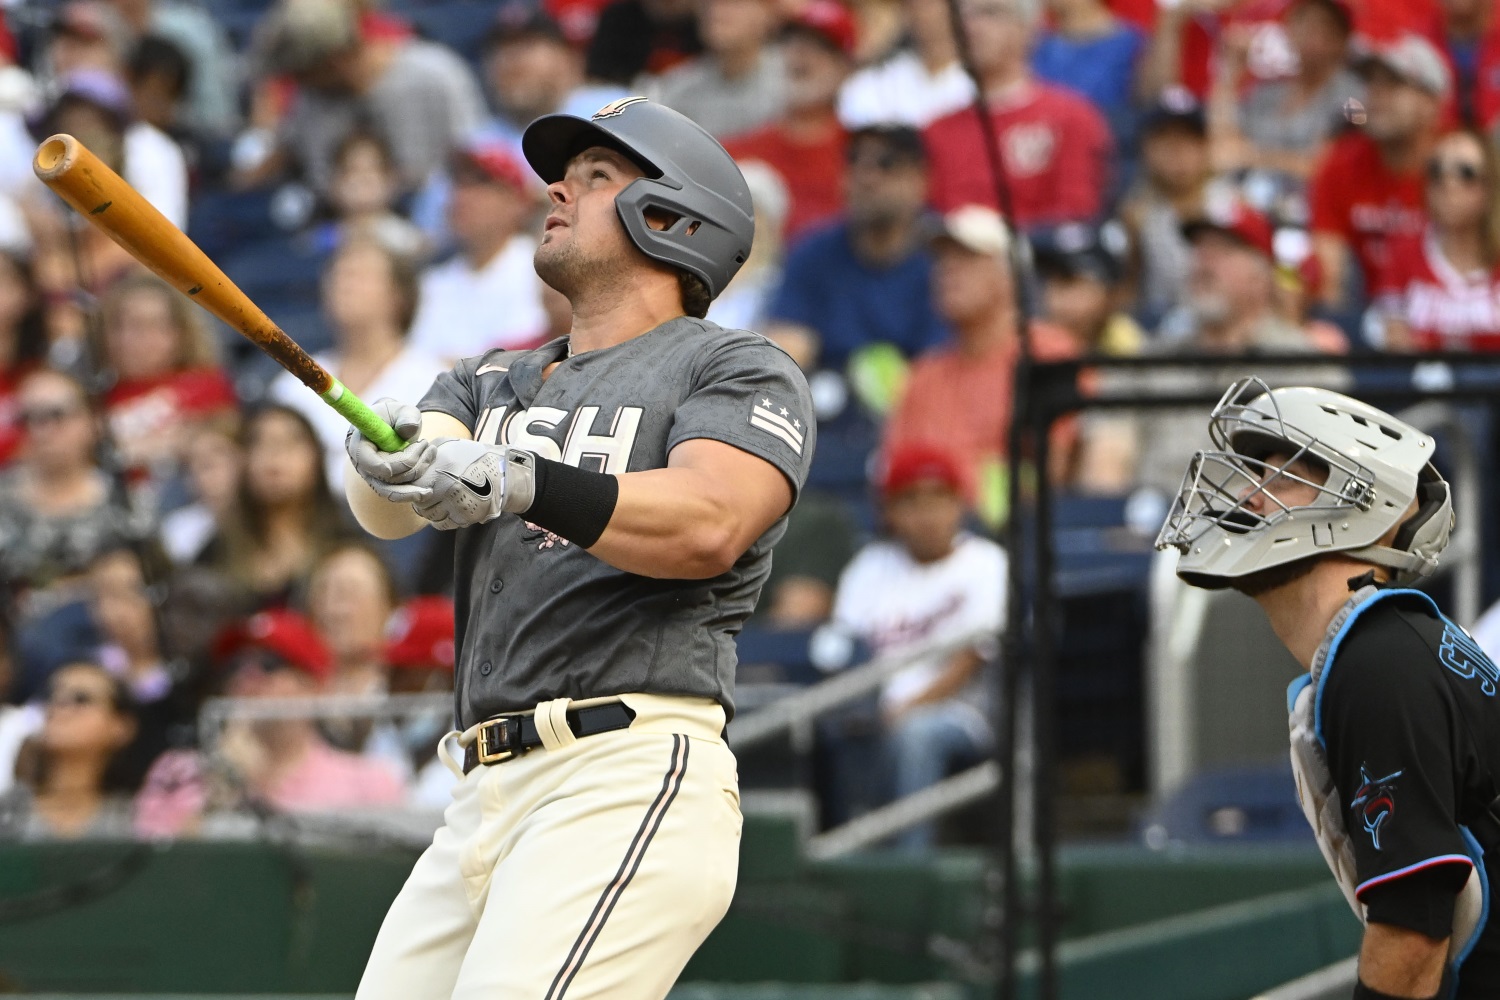 Luke Voit signs minor league contract with Mets after Brewers